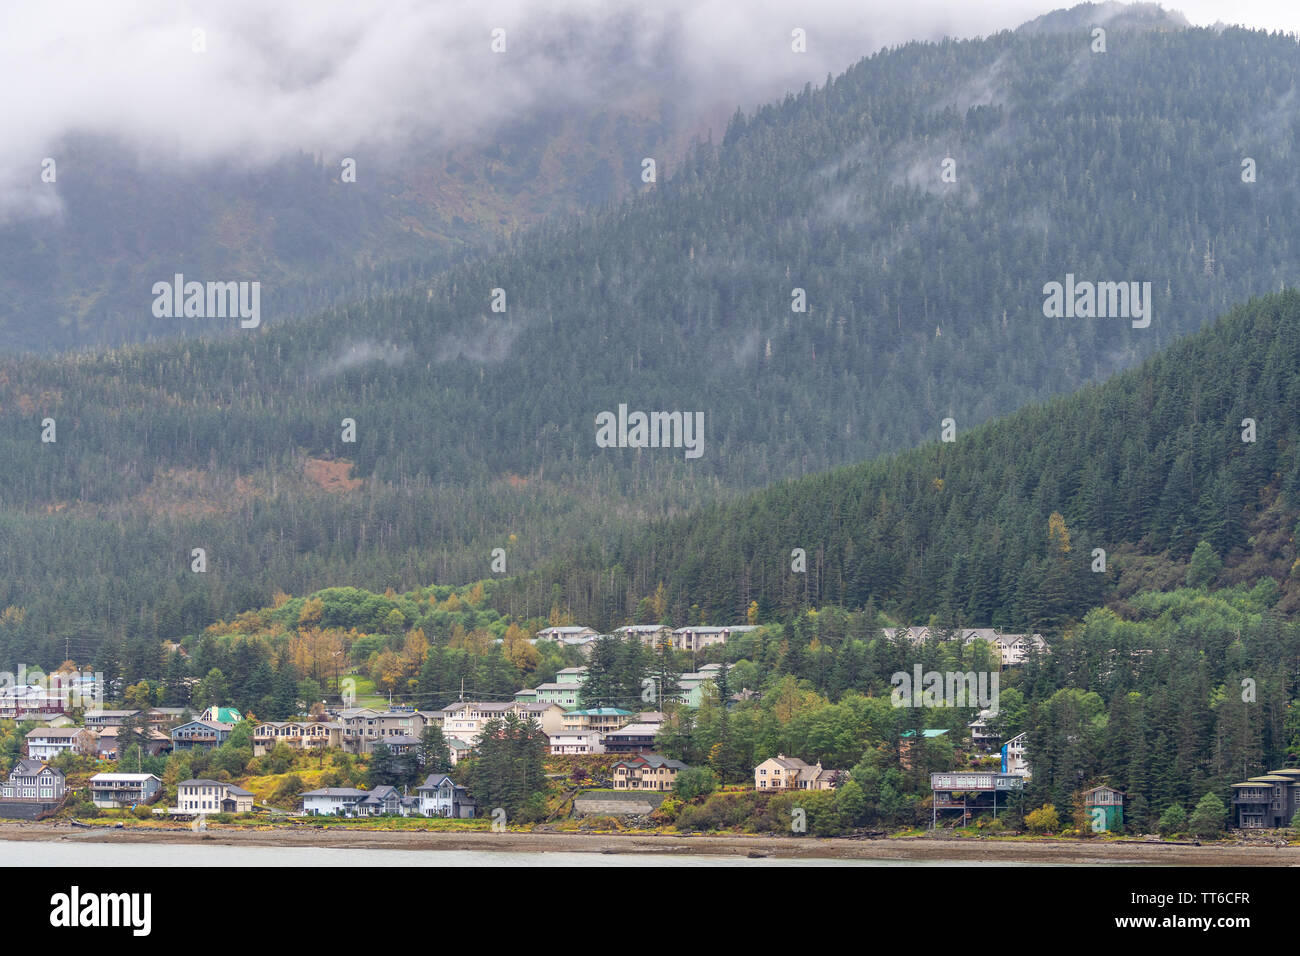 Scenic mountain landscapes in Juneau, Alaska. Community of homes/houses and large commercial office buildings and schools at the foot of the mountain. Stock Photo